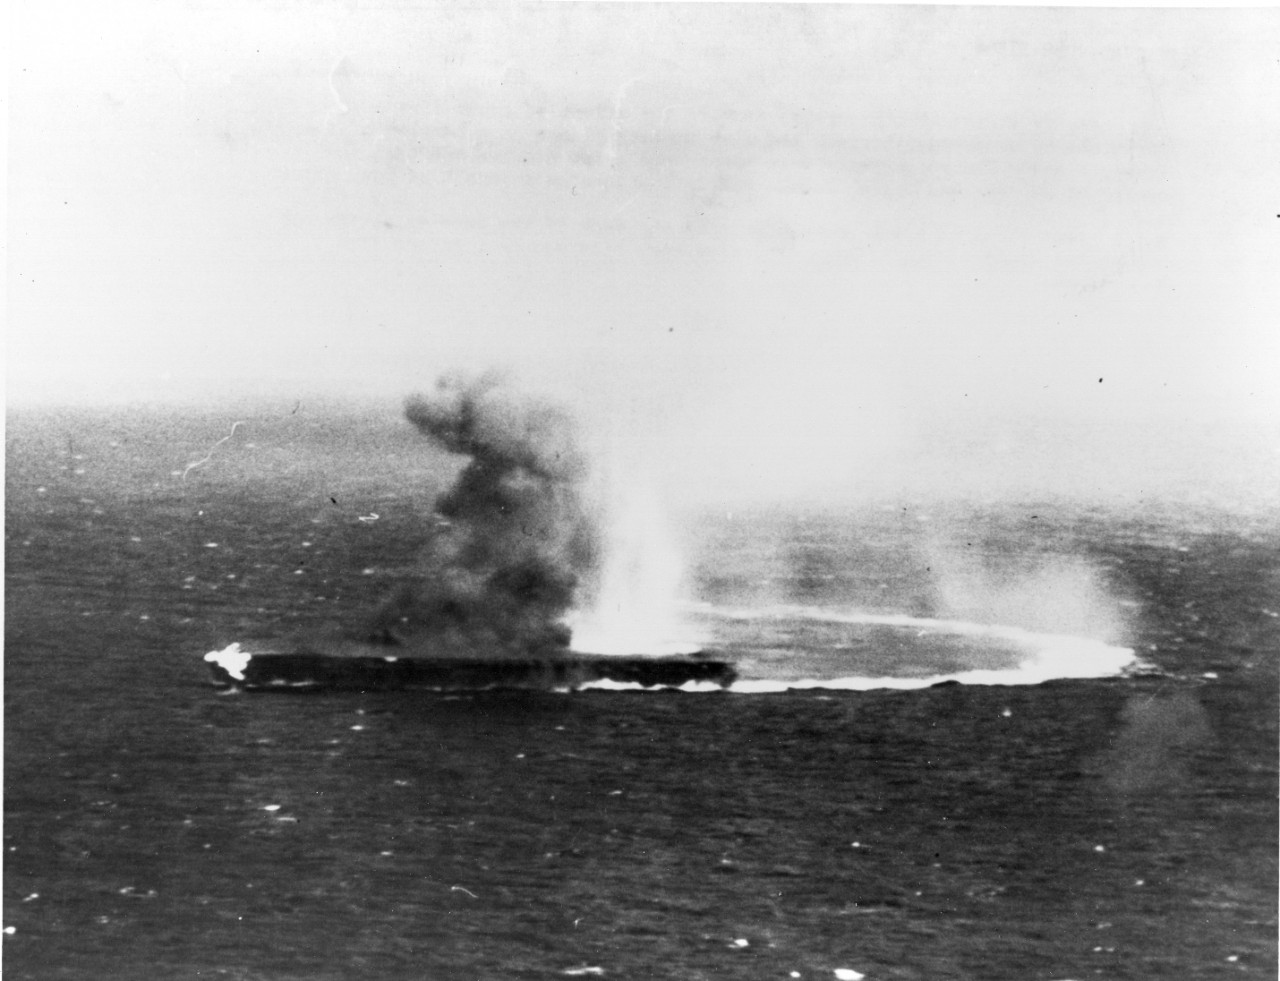 Photo #: 80-G-17031  Battle of Coral Sea, May 1942